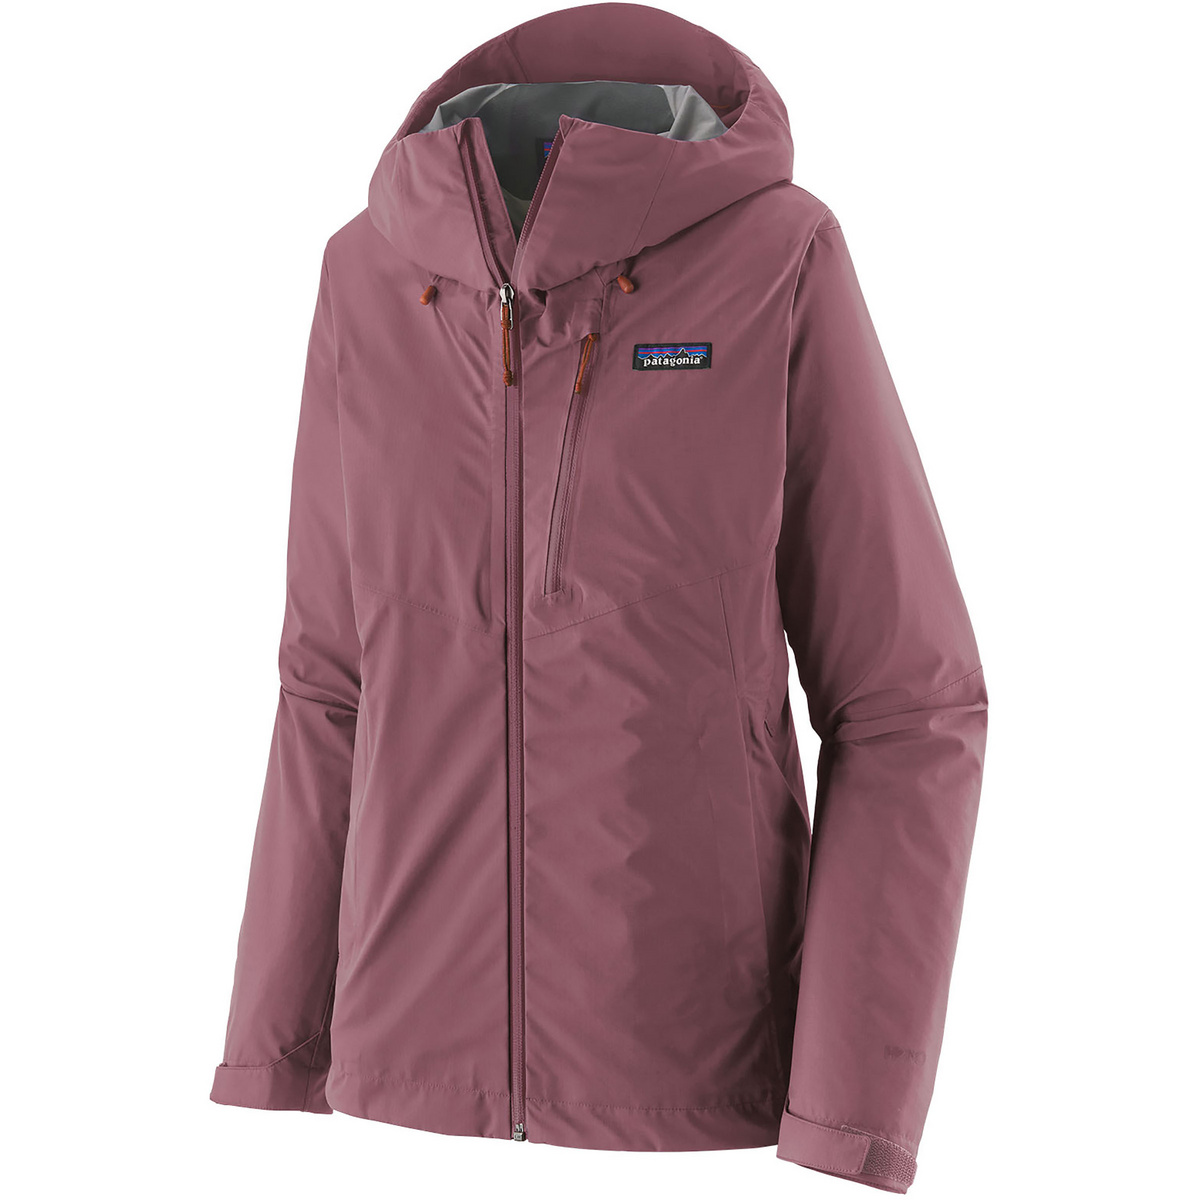 Image of Patagonia Donna Giacca Crest Granite